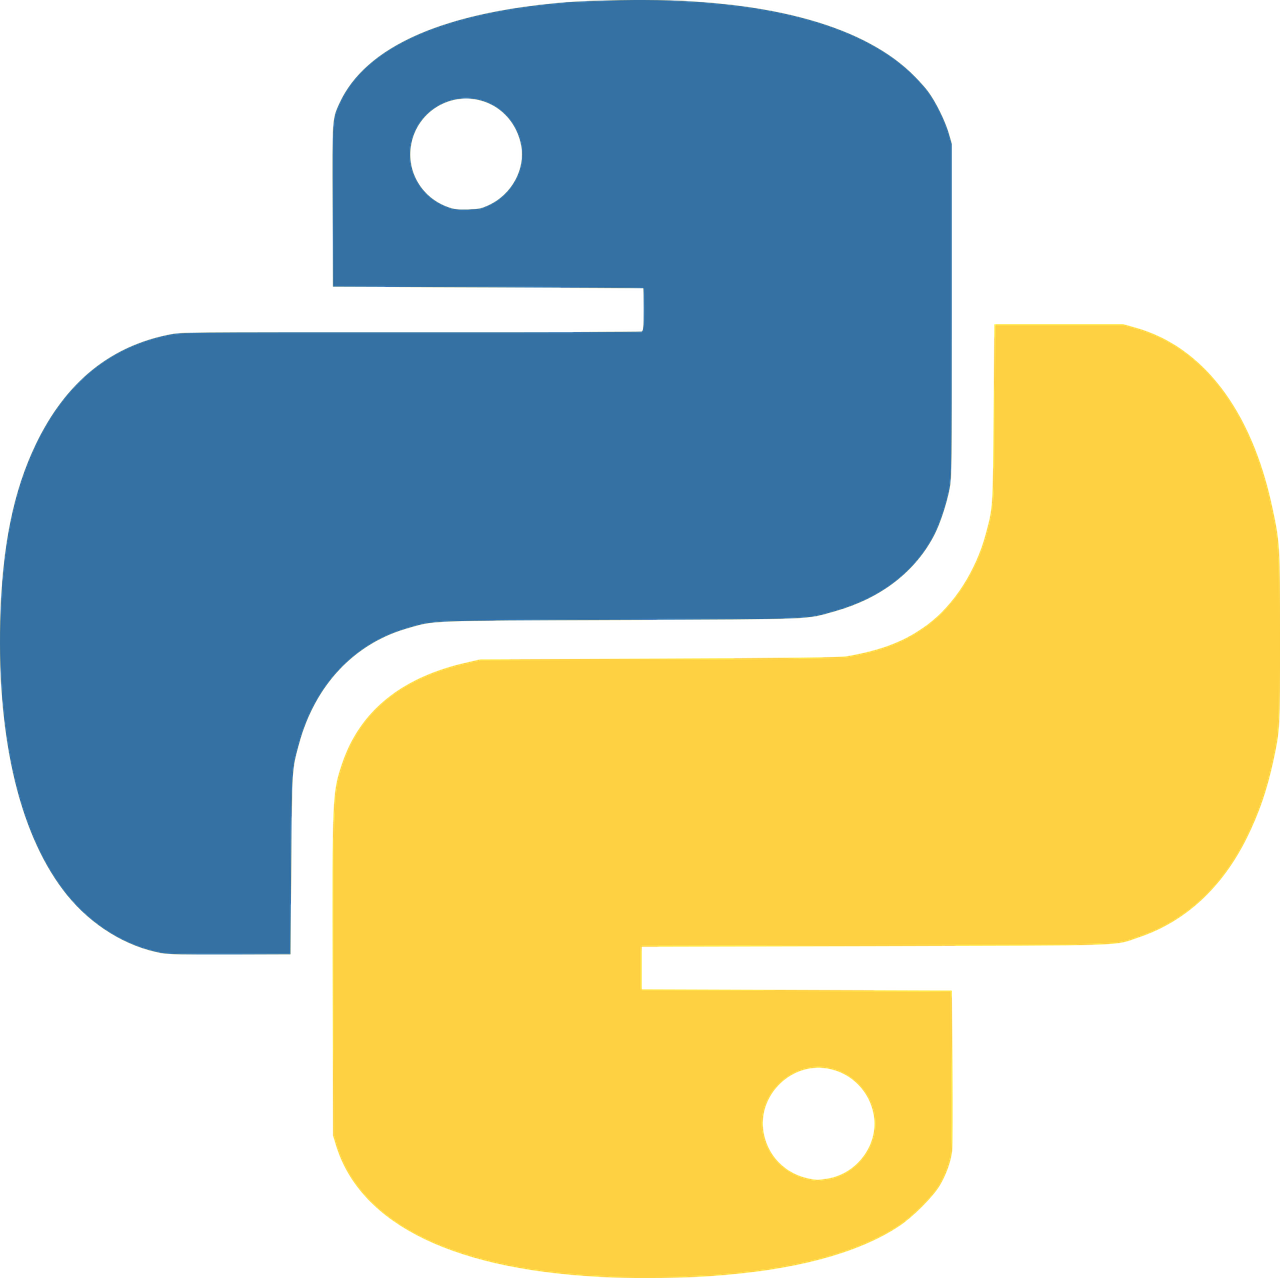 How to execute Python code from within Visual Studio Code